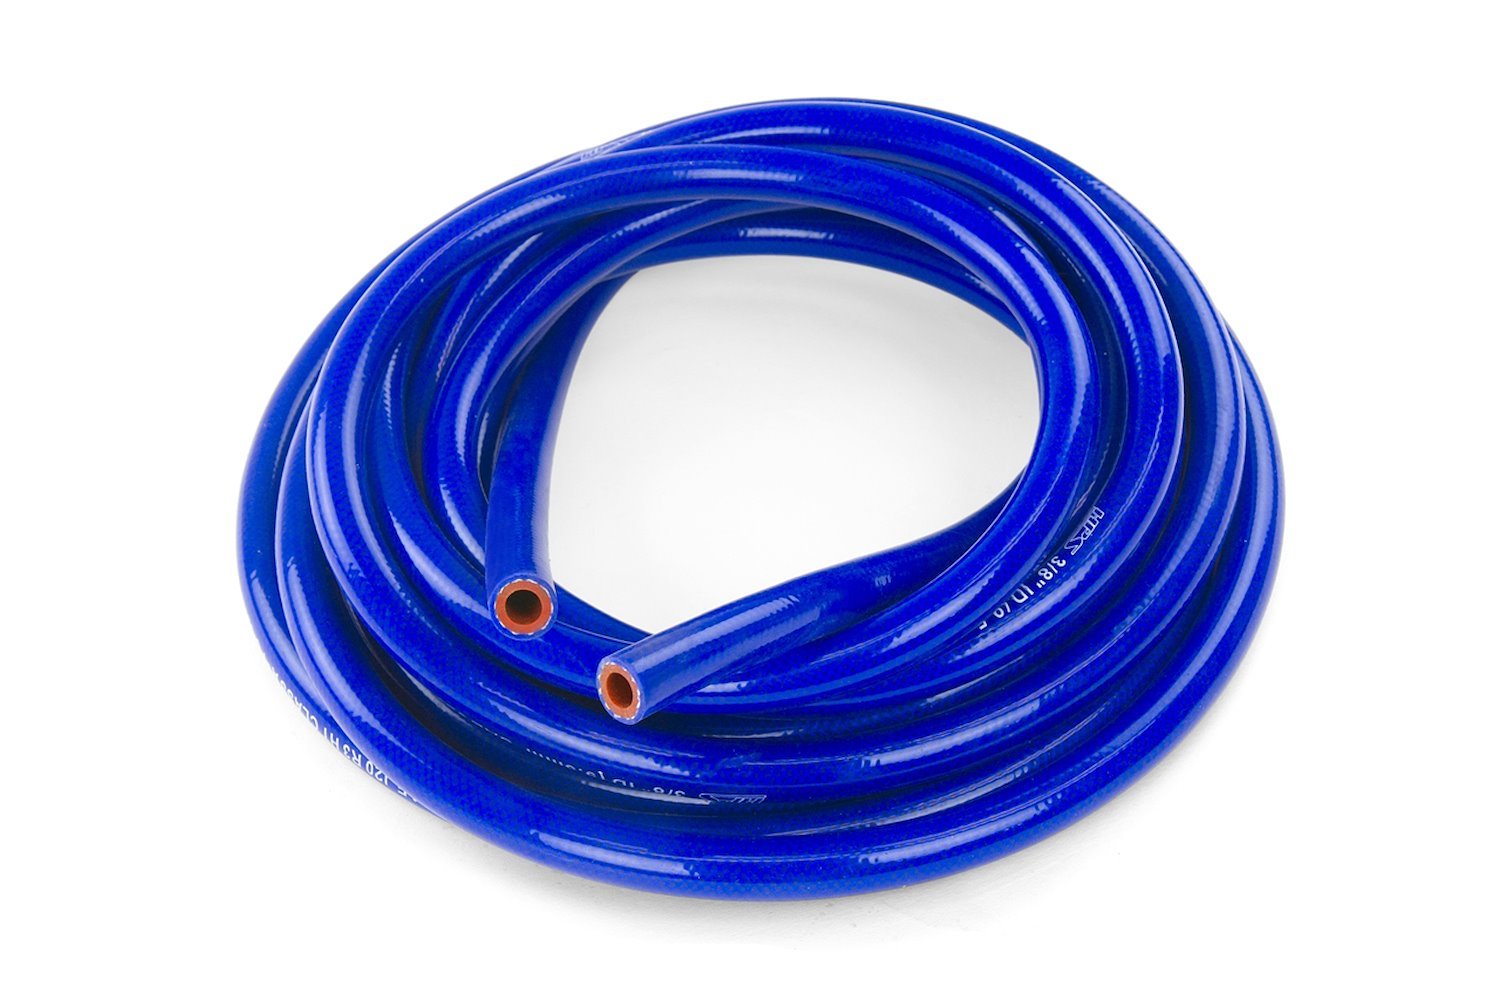 HTHH-075-BLUEx25 Silicone Heater Hose Tubing, High-Temp 1-Ply Reinforced, 3/4 in. ID, 25 ft. Roll, Blue